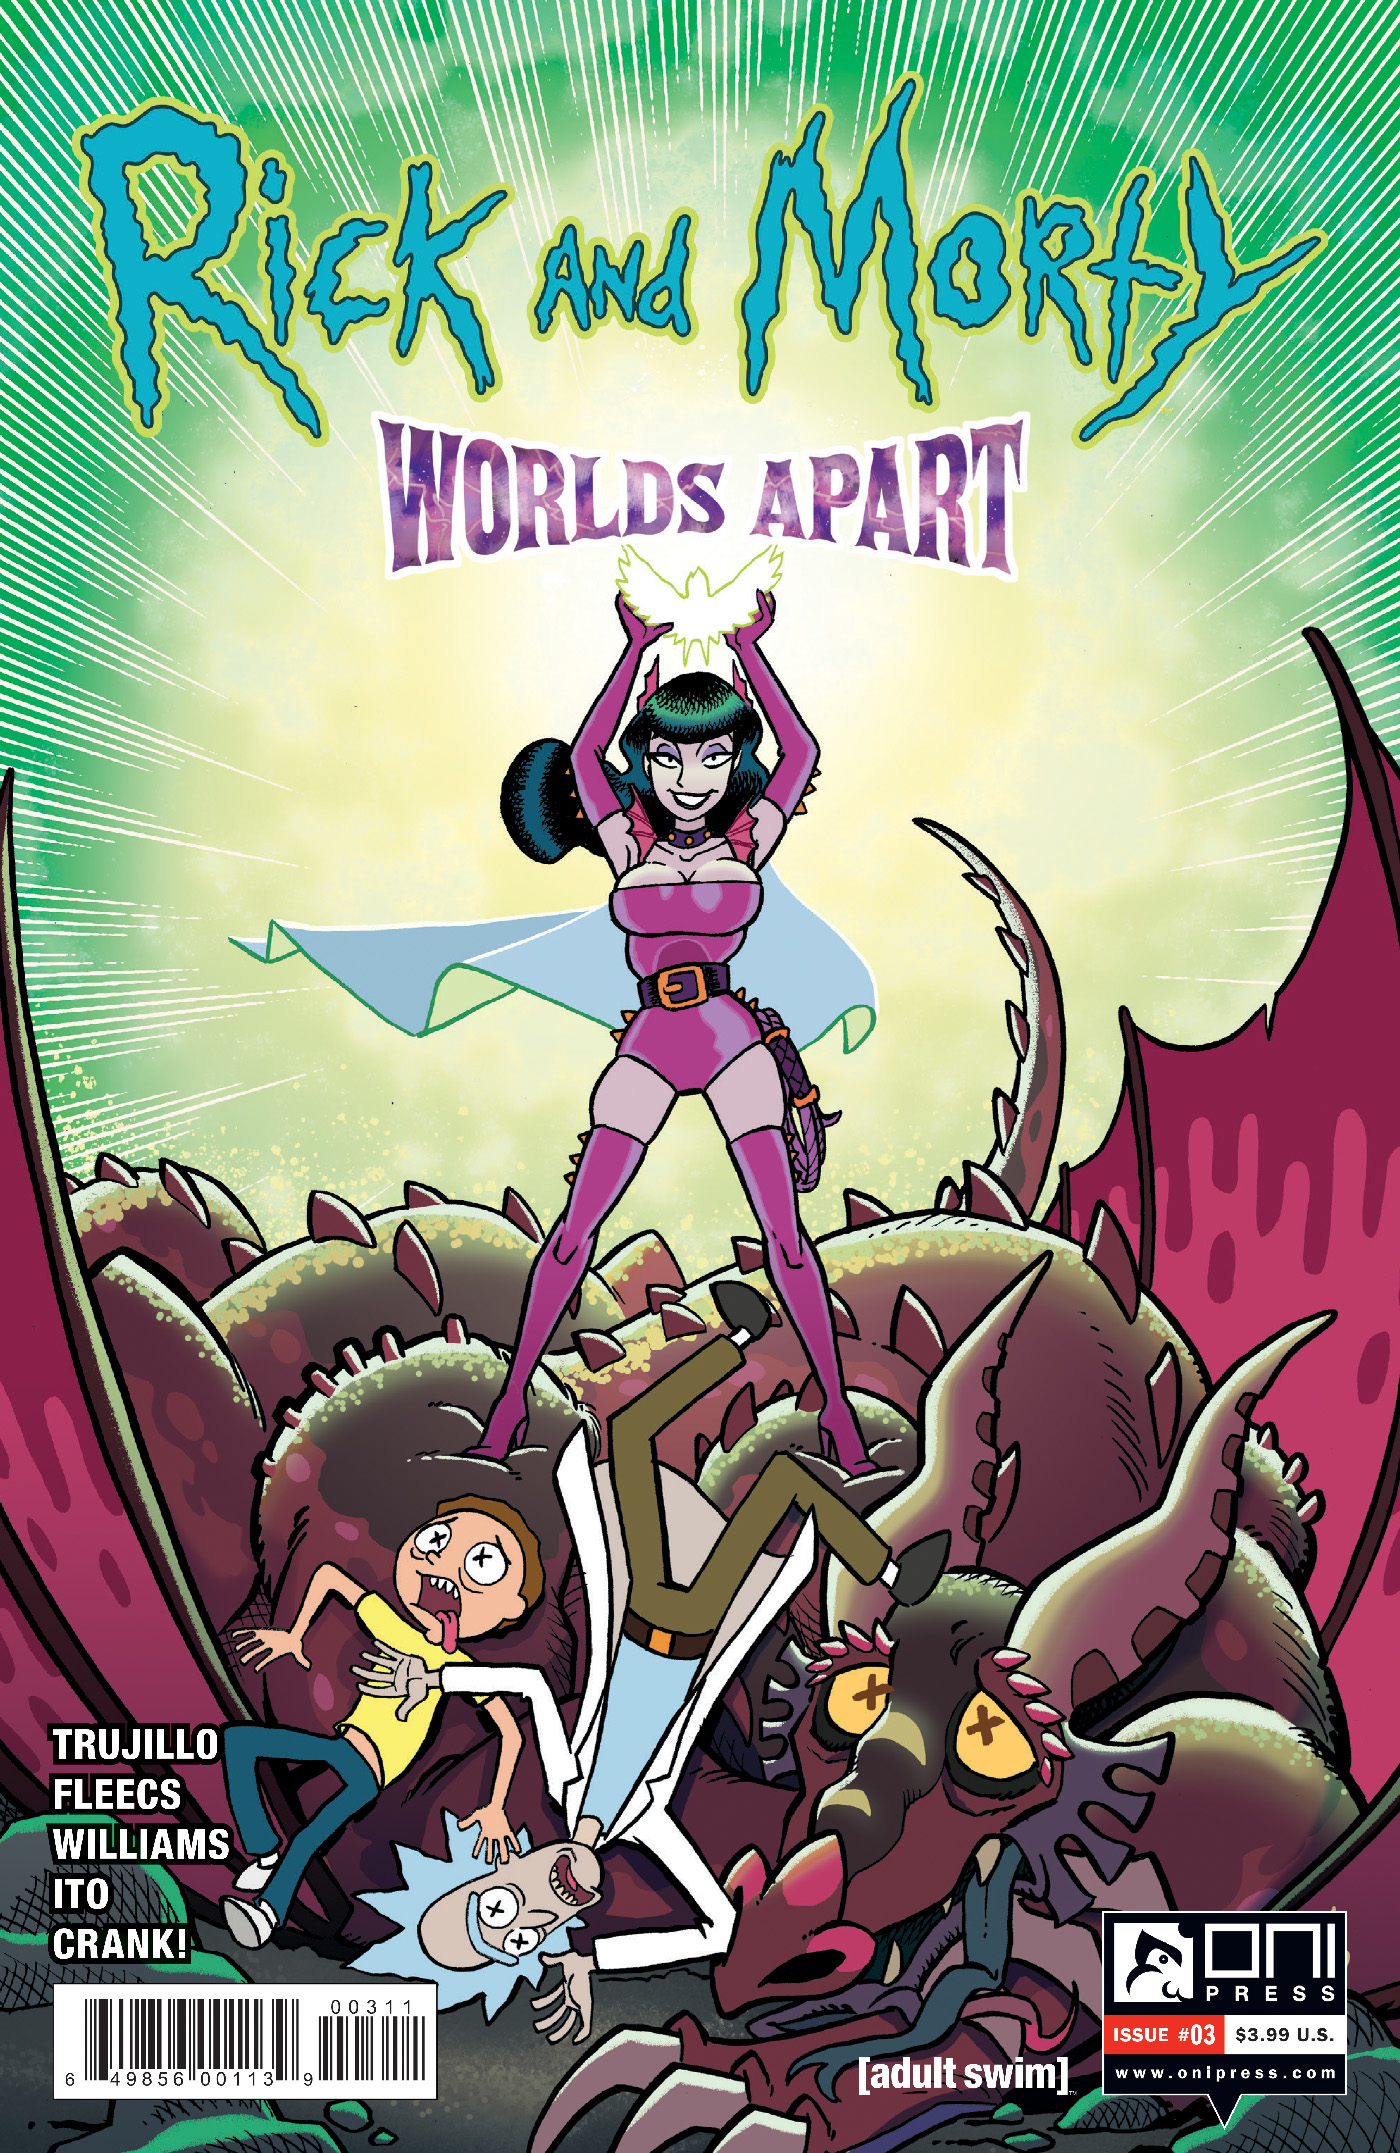 Rick and Morty Worlds Apart #3 Cover A Fleecs